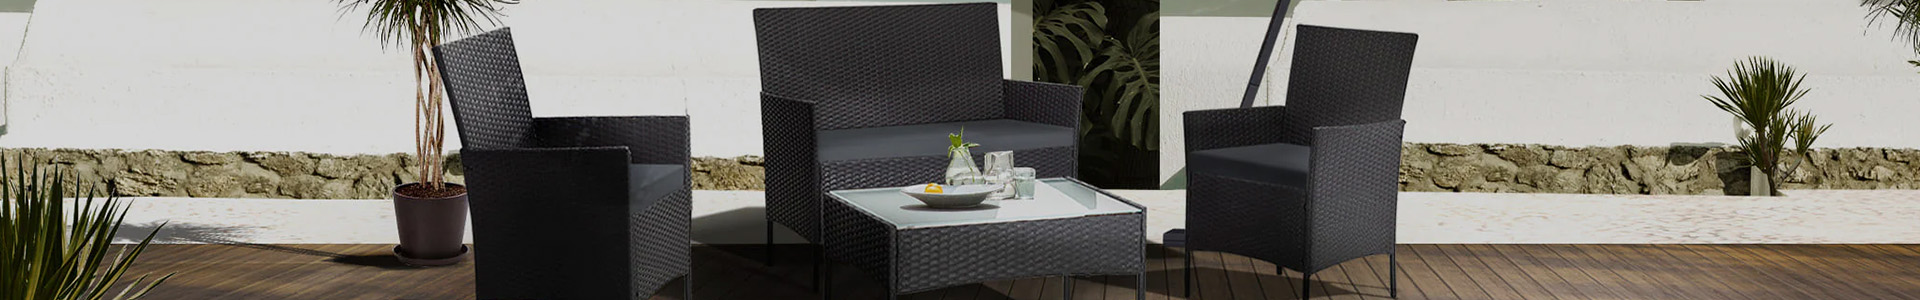 An outdoor dining setting